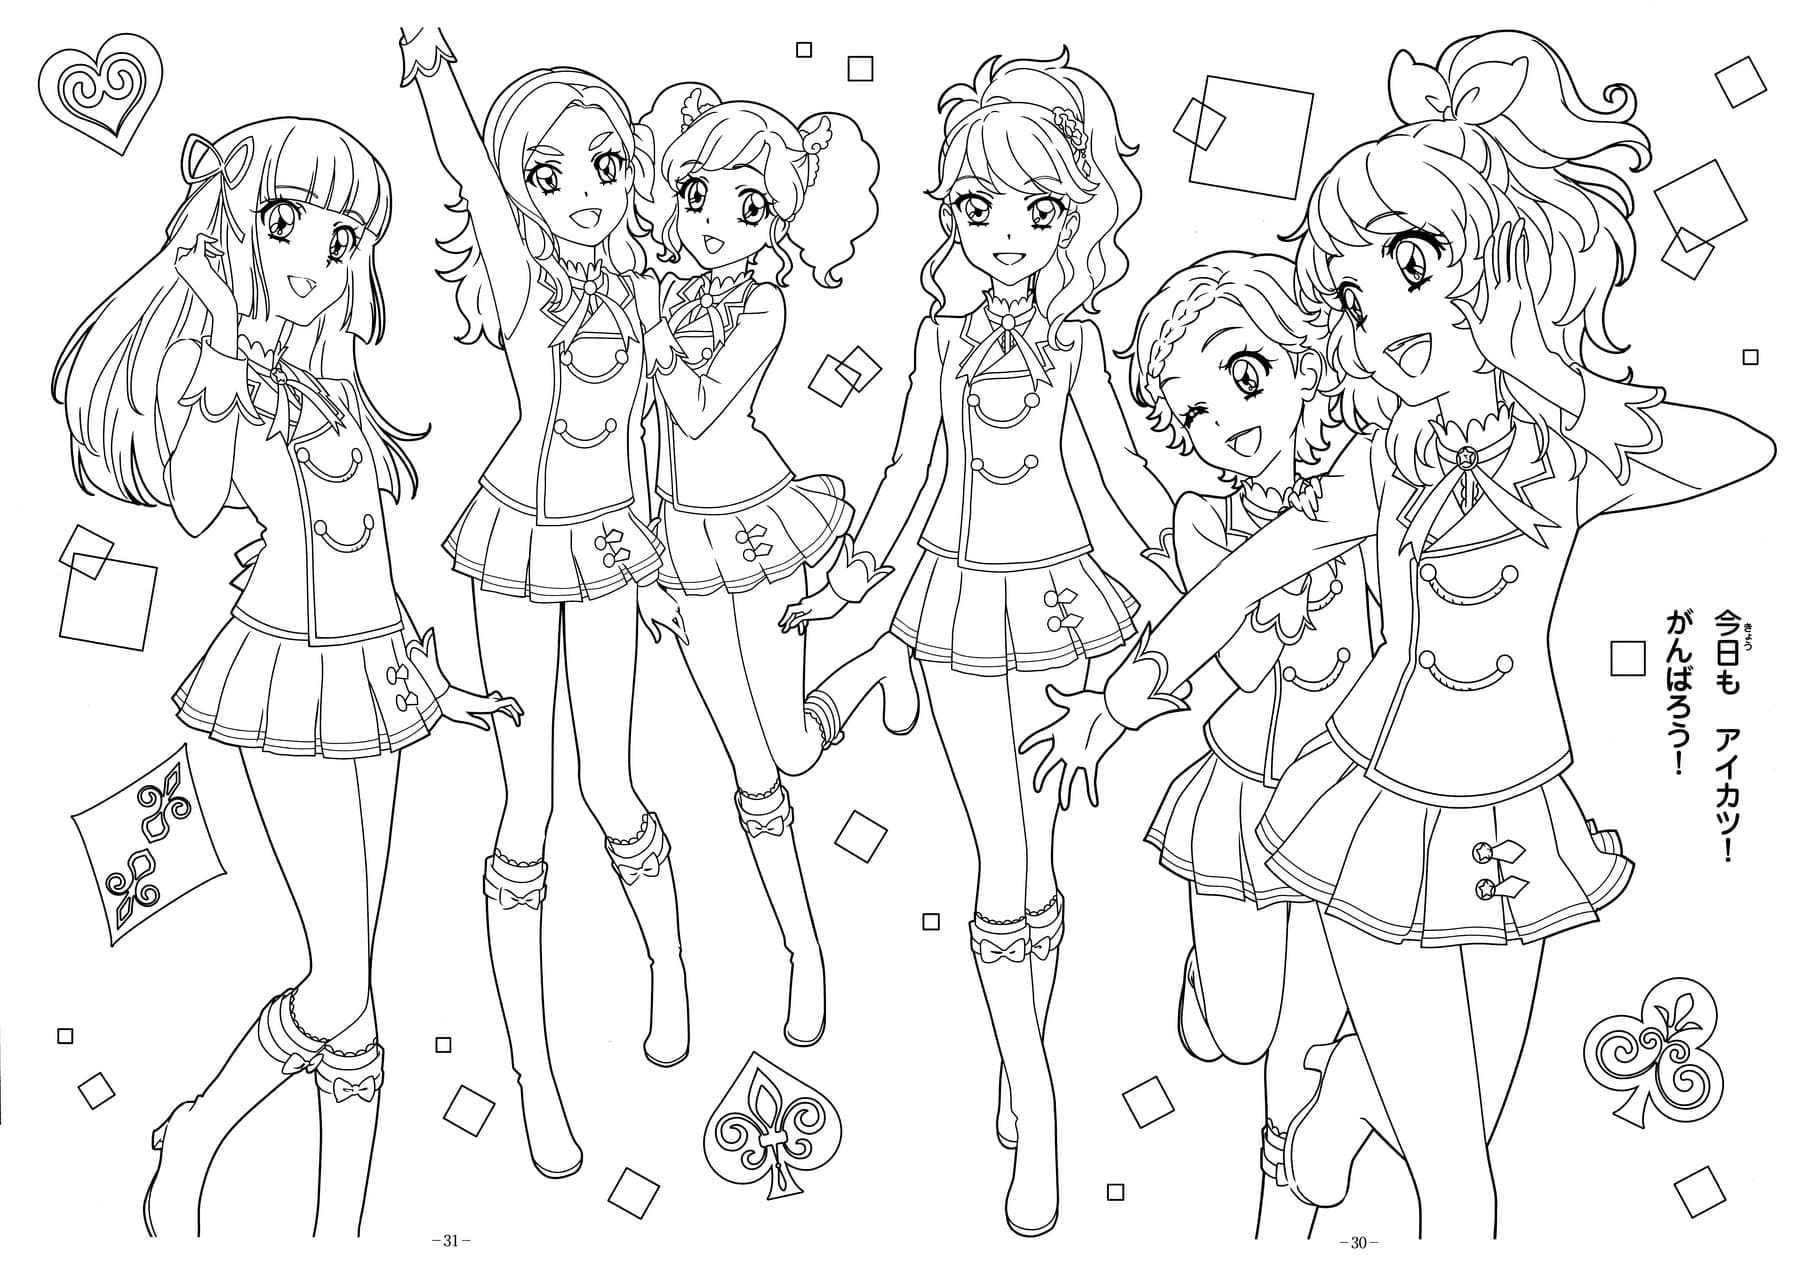 Cute Anime Girls from Aikatsu Coloring Page - Anime Coloring Pages